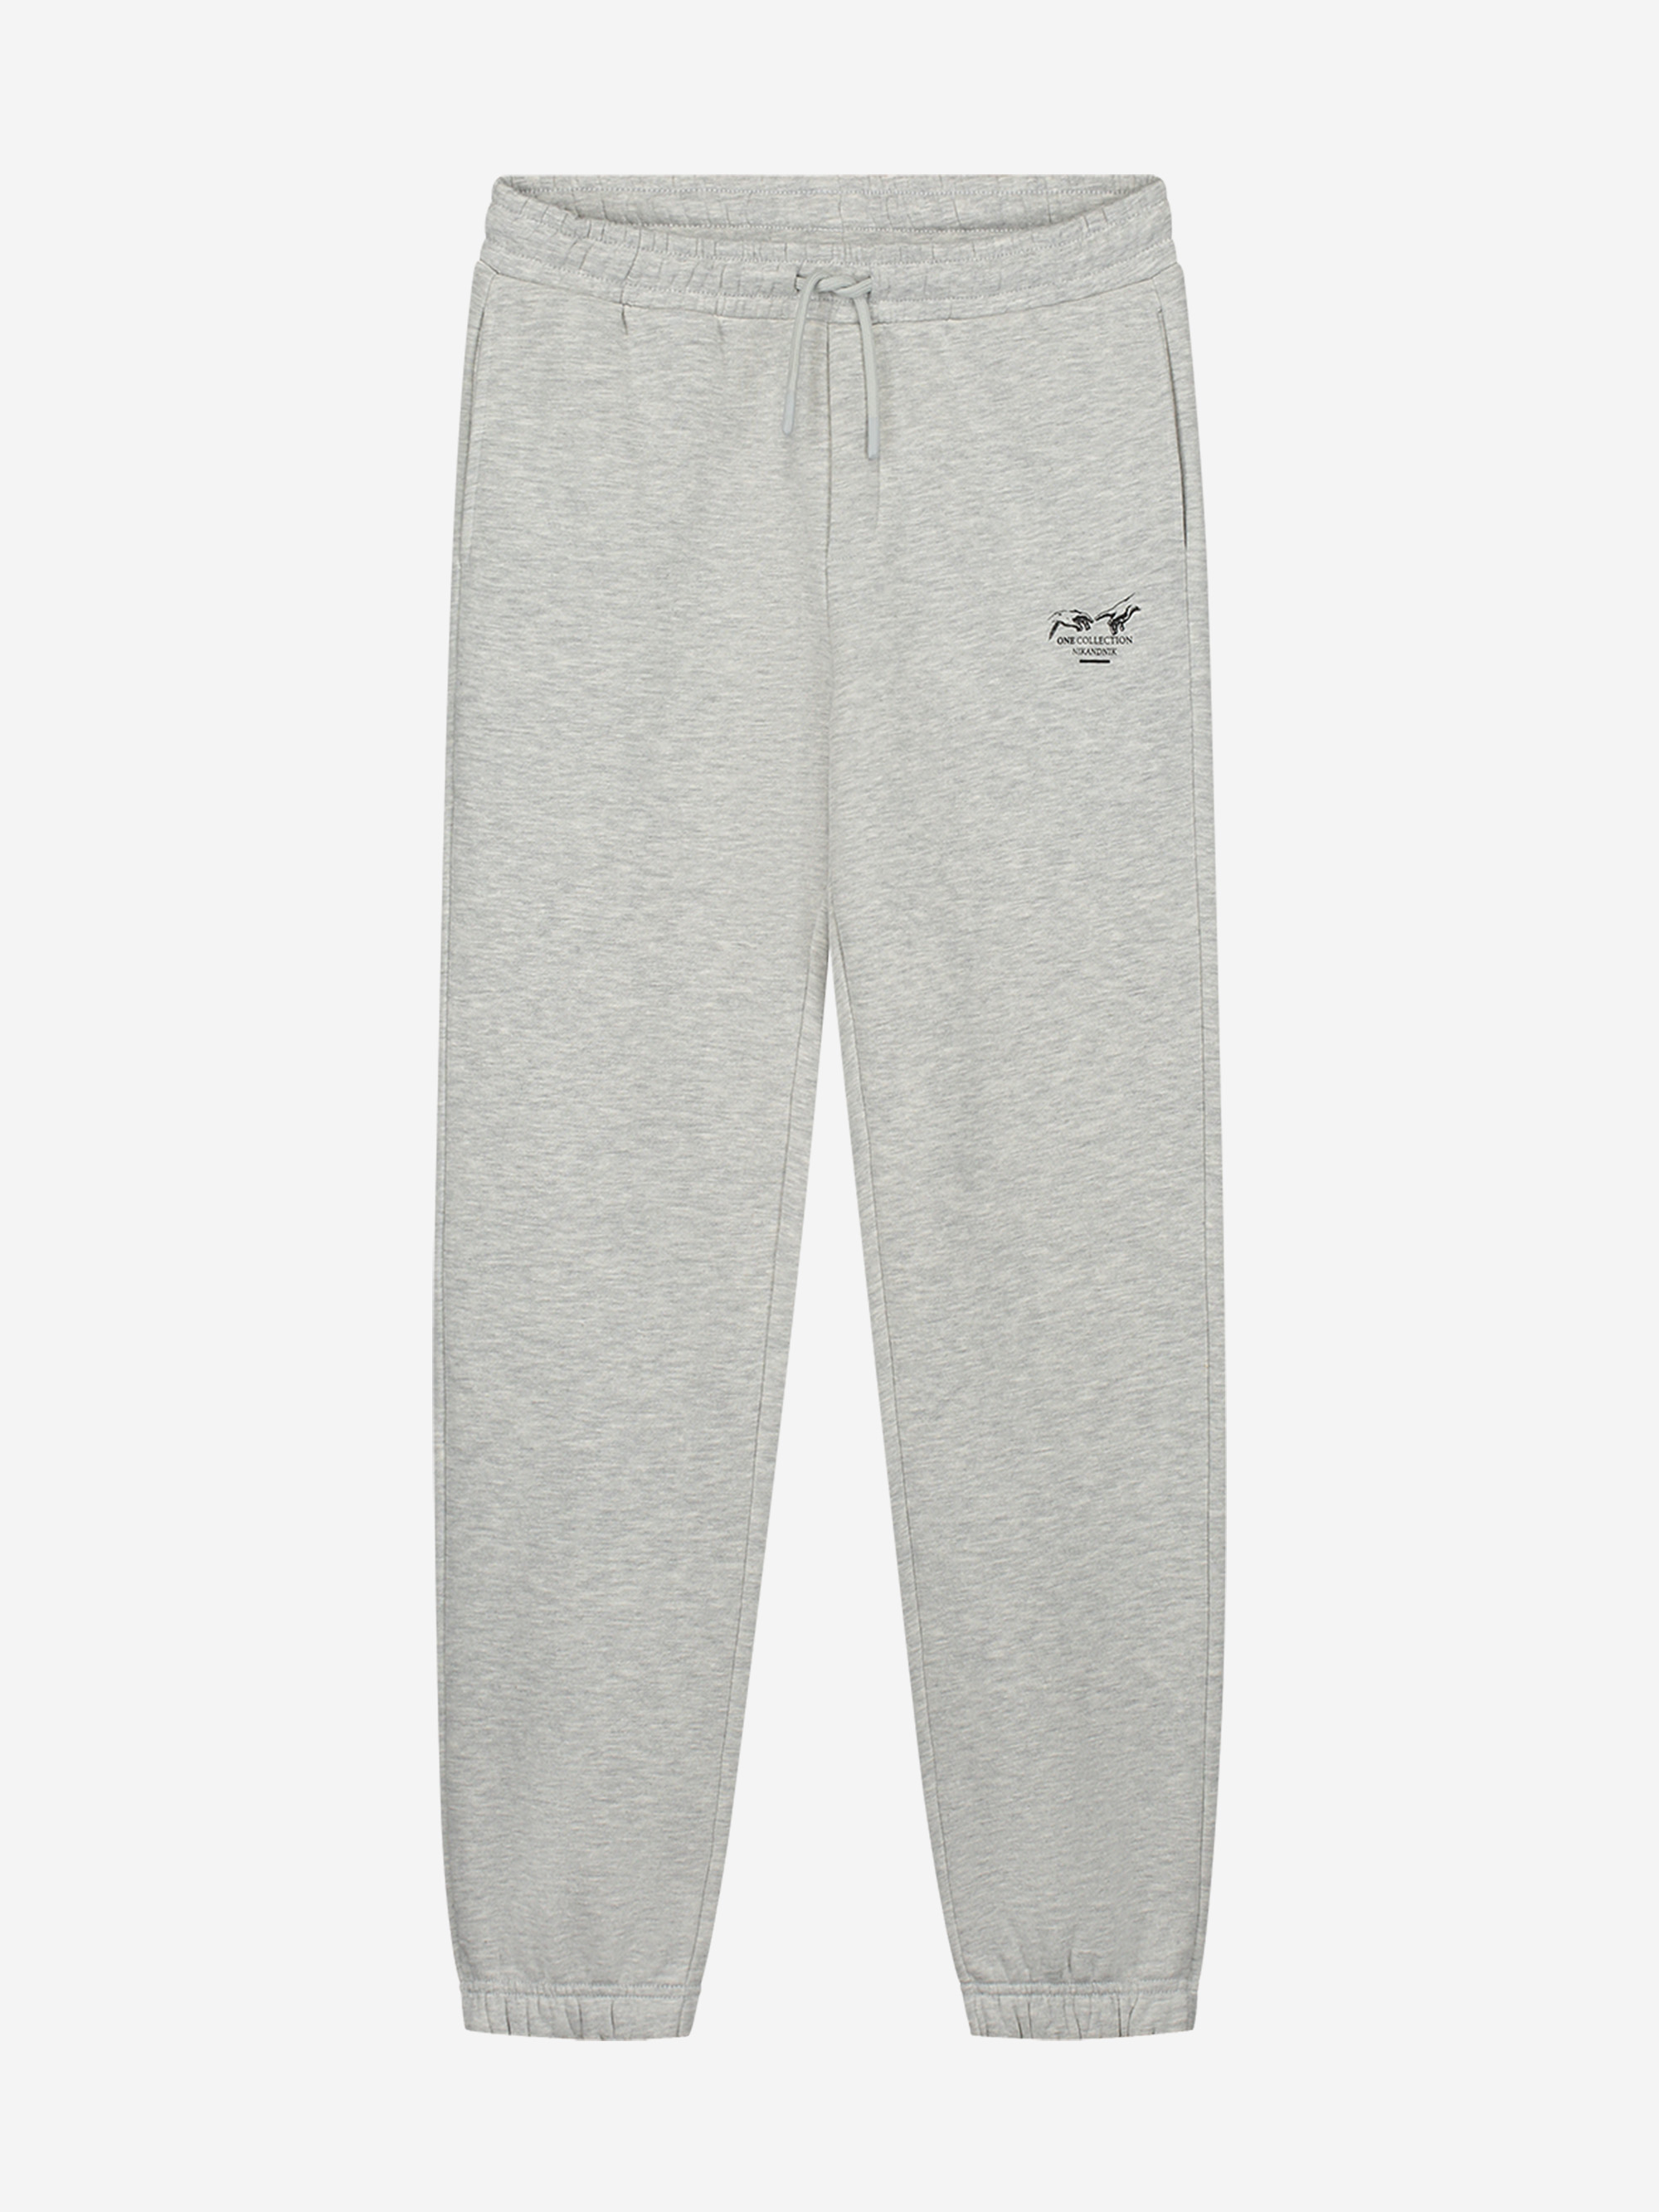 Mid rise sweatpants with graphic print